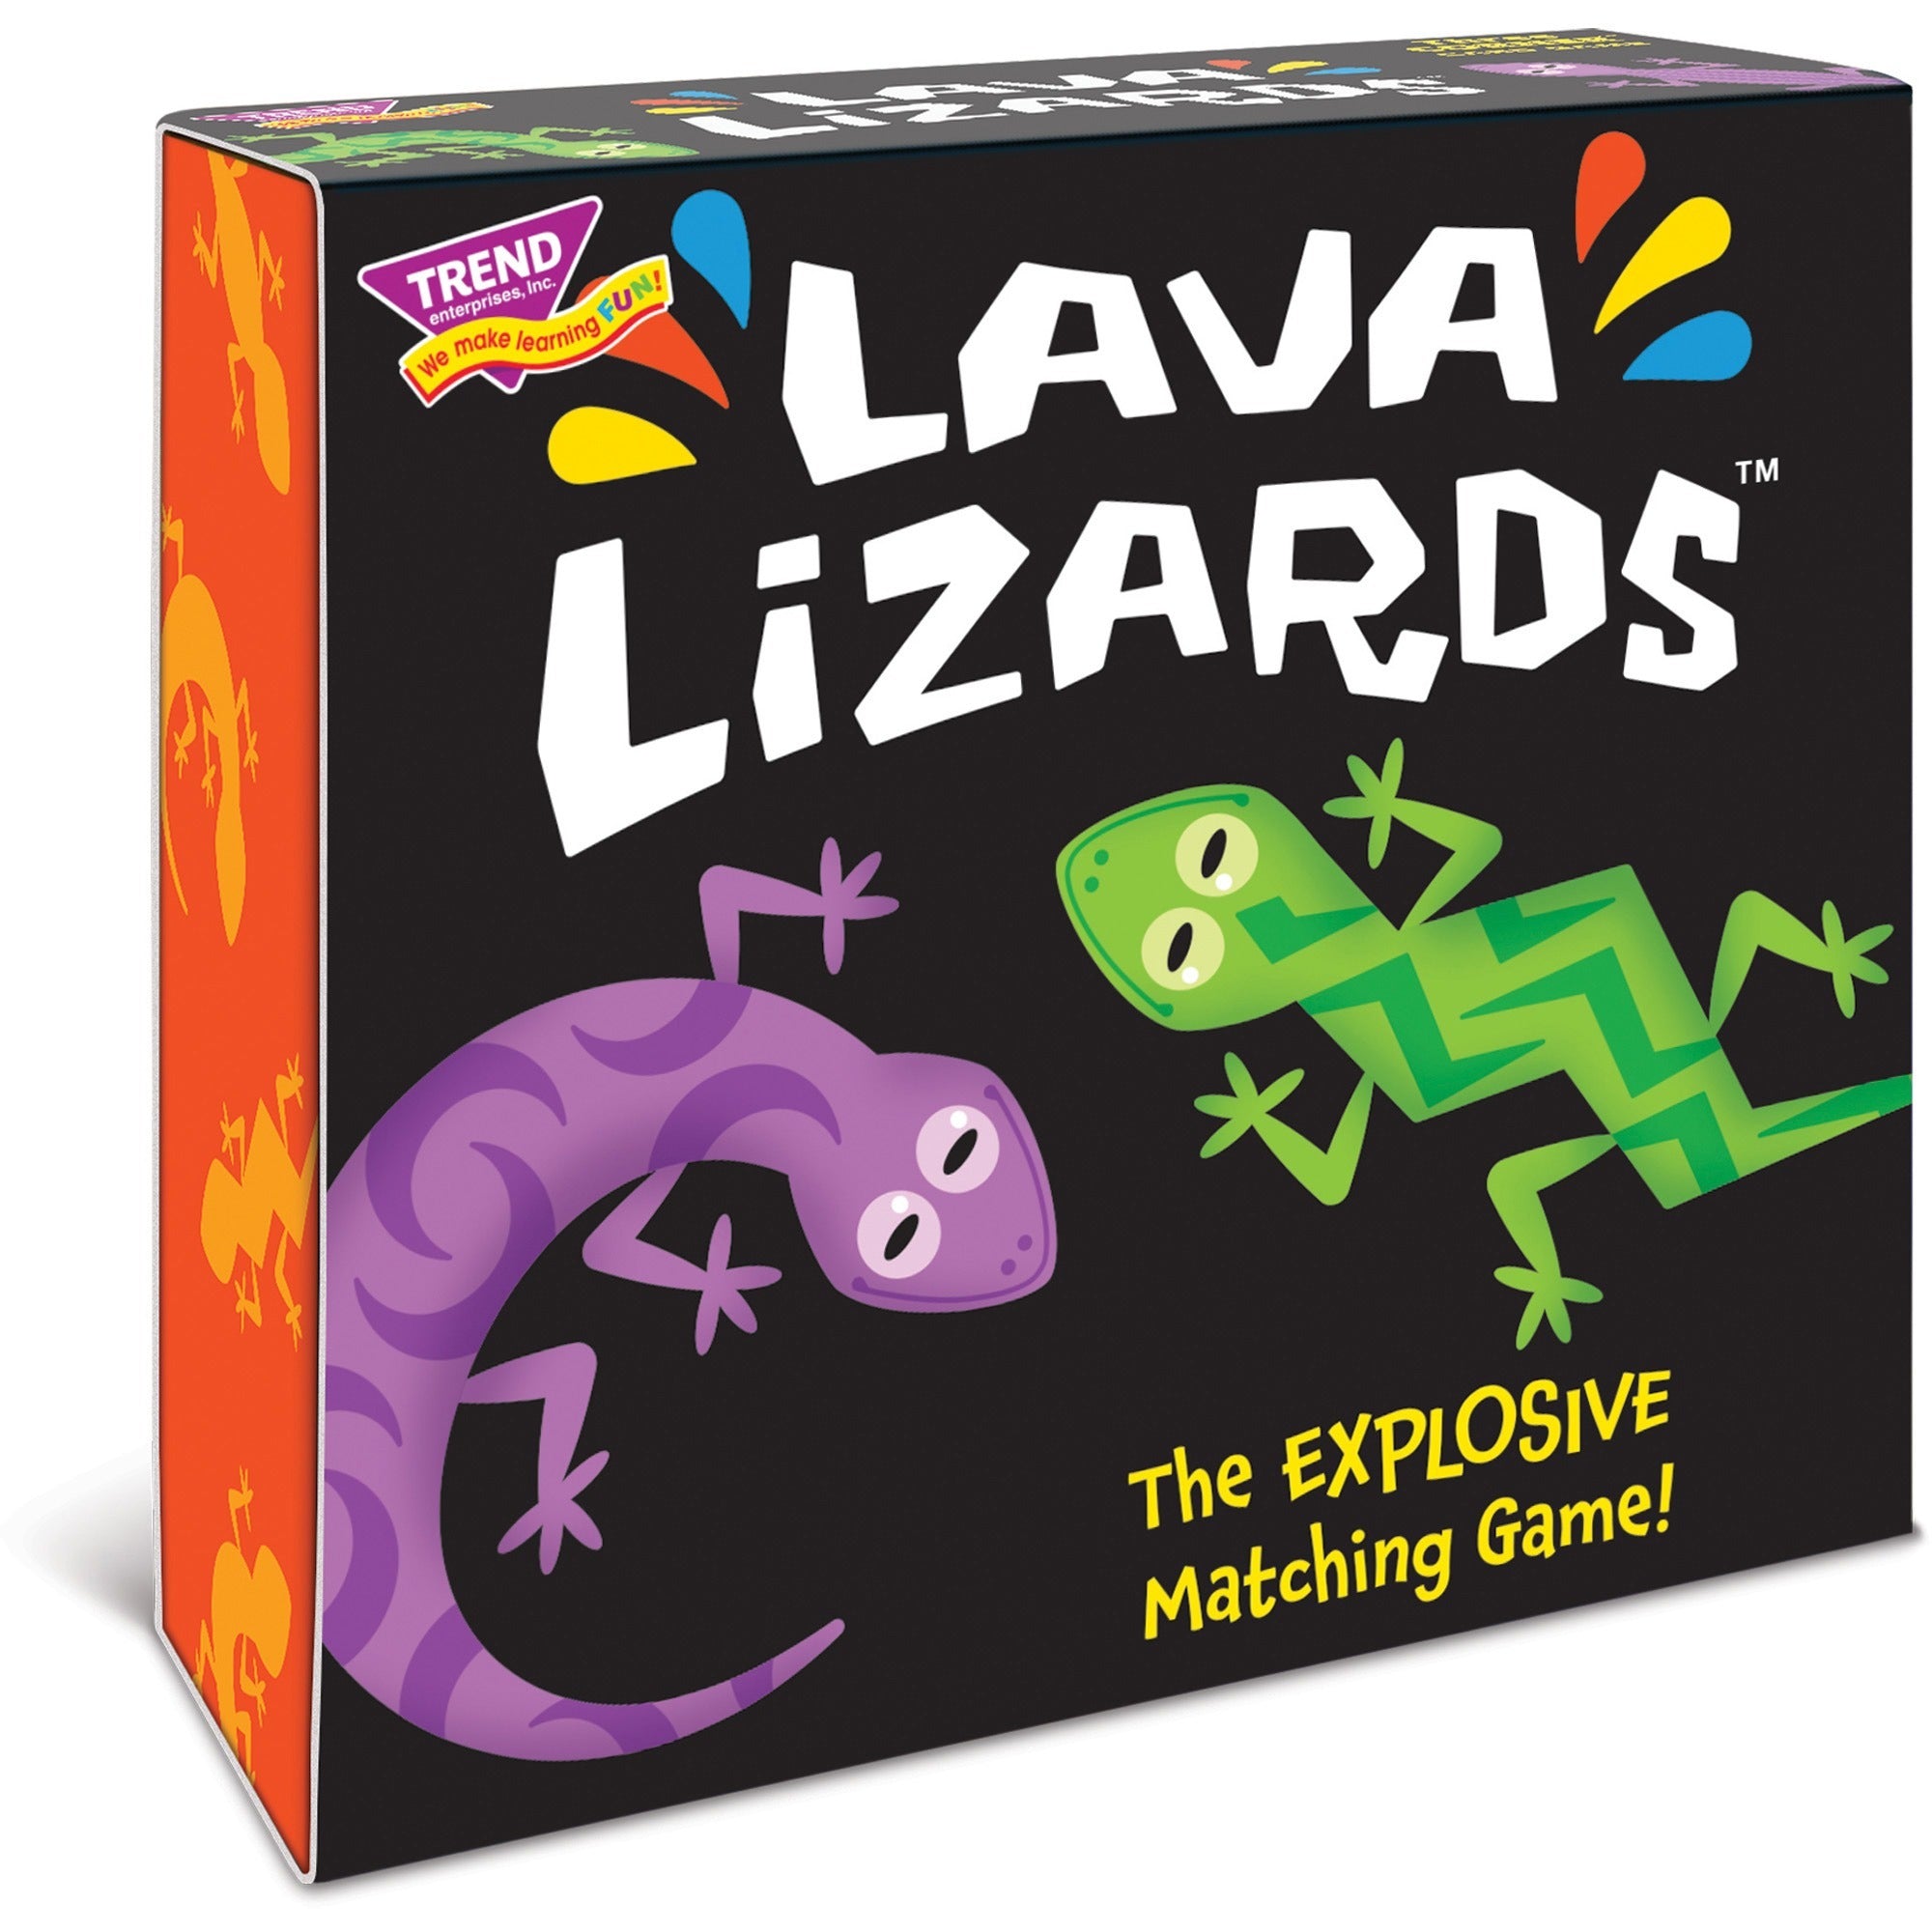 trend-lava-lizards-three-corner-card-game-matching-1-to-4-players-1-each_tept20002 - 2